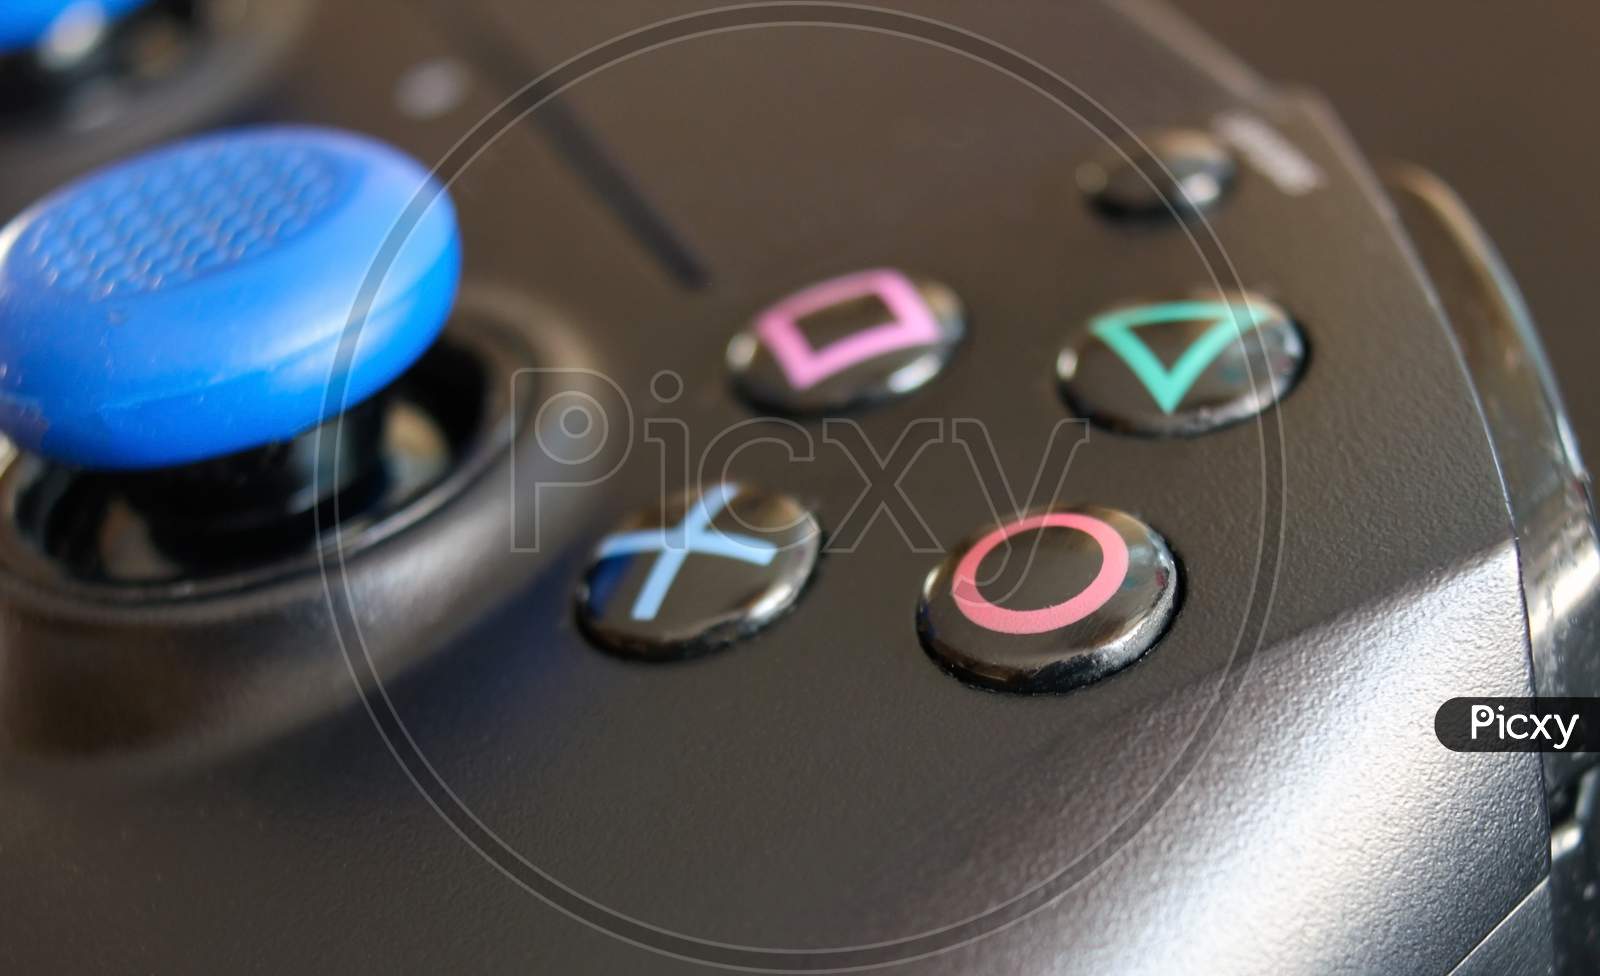 Krakow, Poland- April 13, 2021: A Close Up Extreme Selective Focus Of The Iconic Play Station Buttons On A Wireless Controller. The Square, Cross, Triangle And Circle Button. Macro Shot.